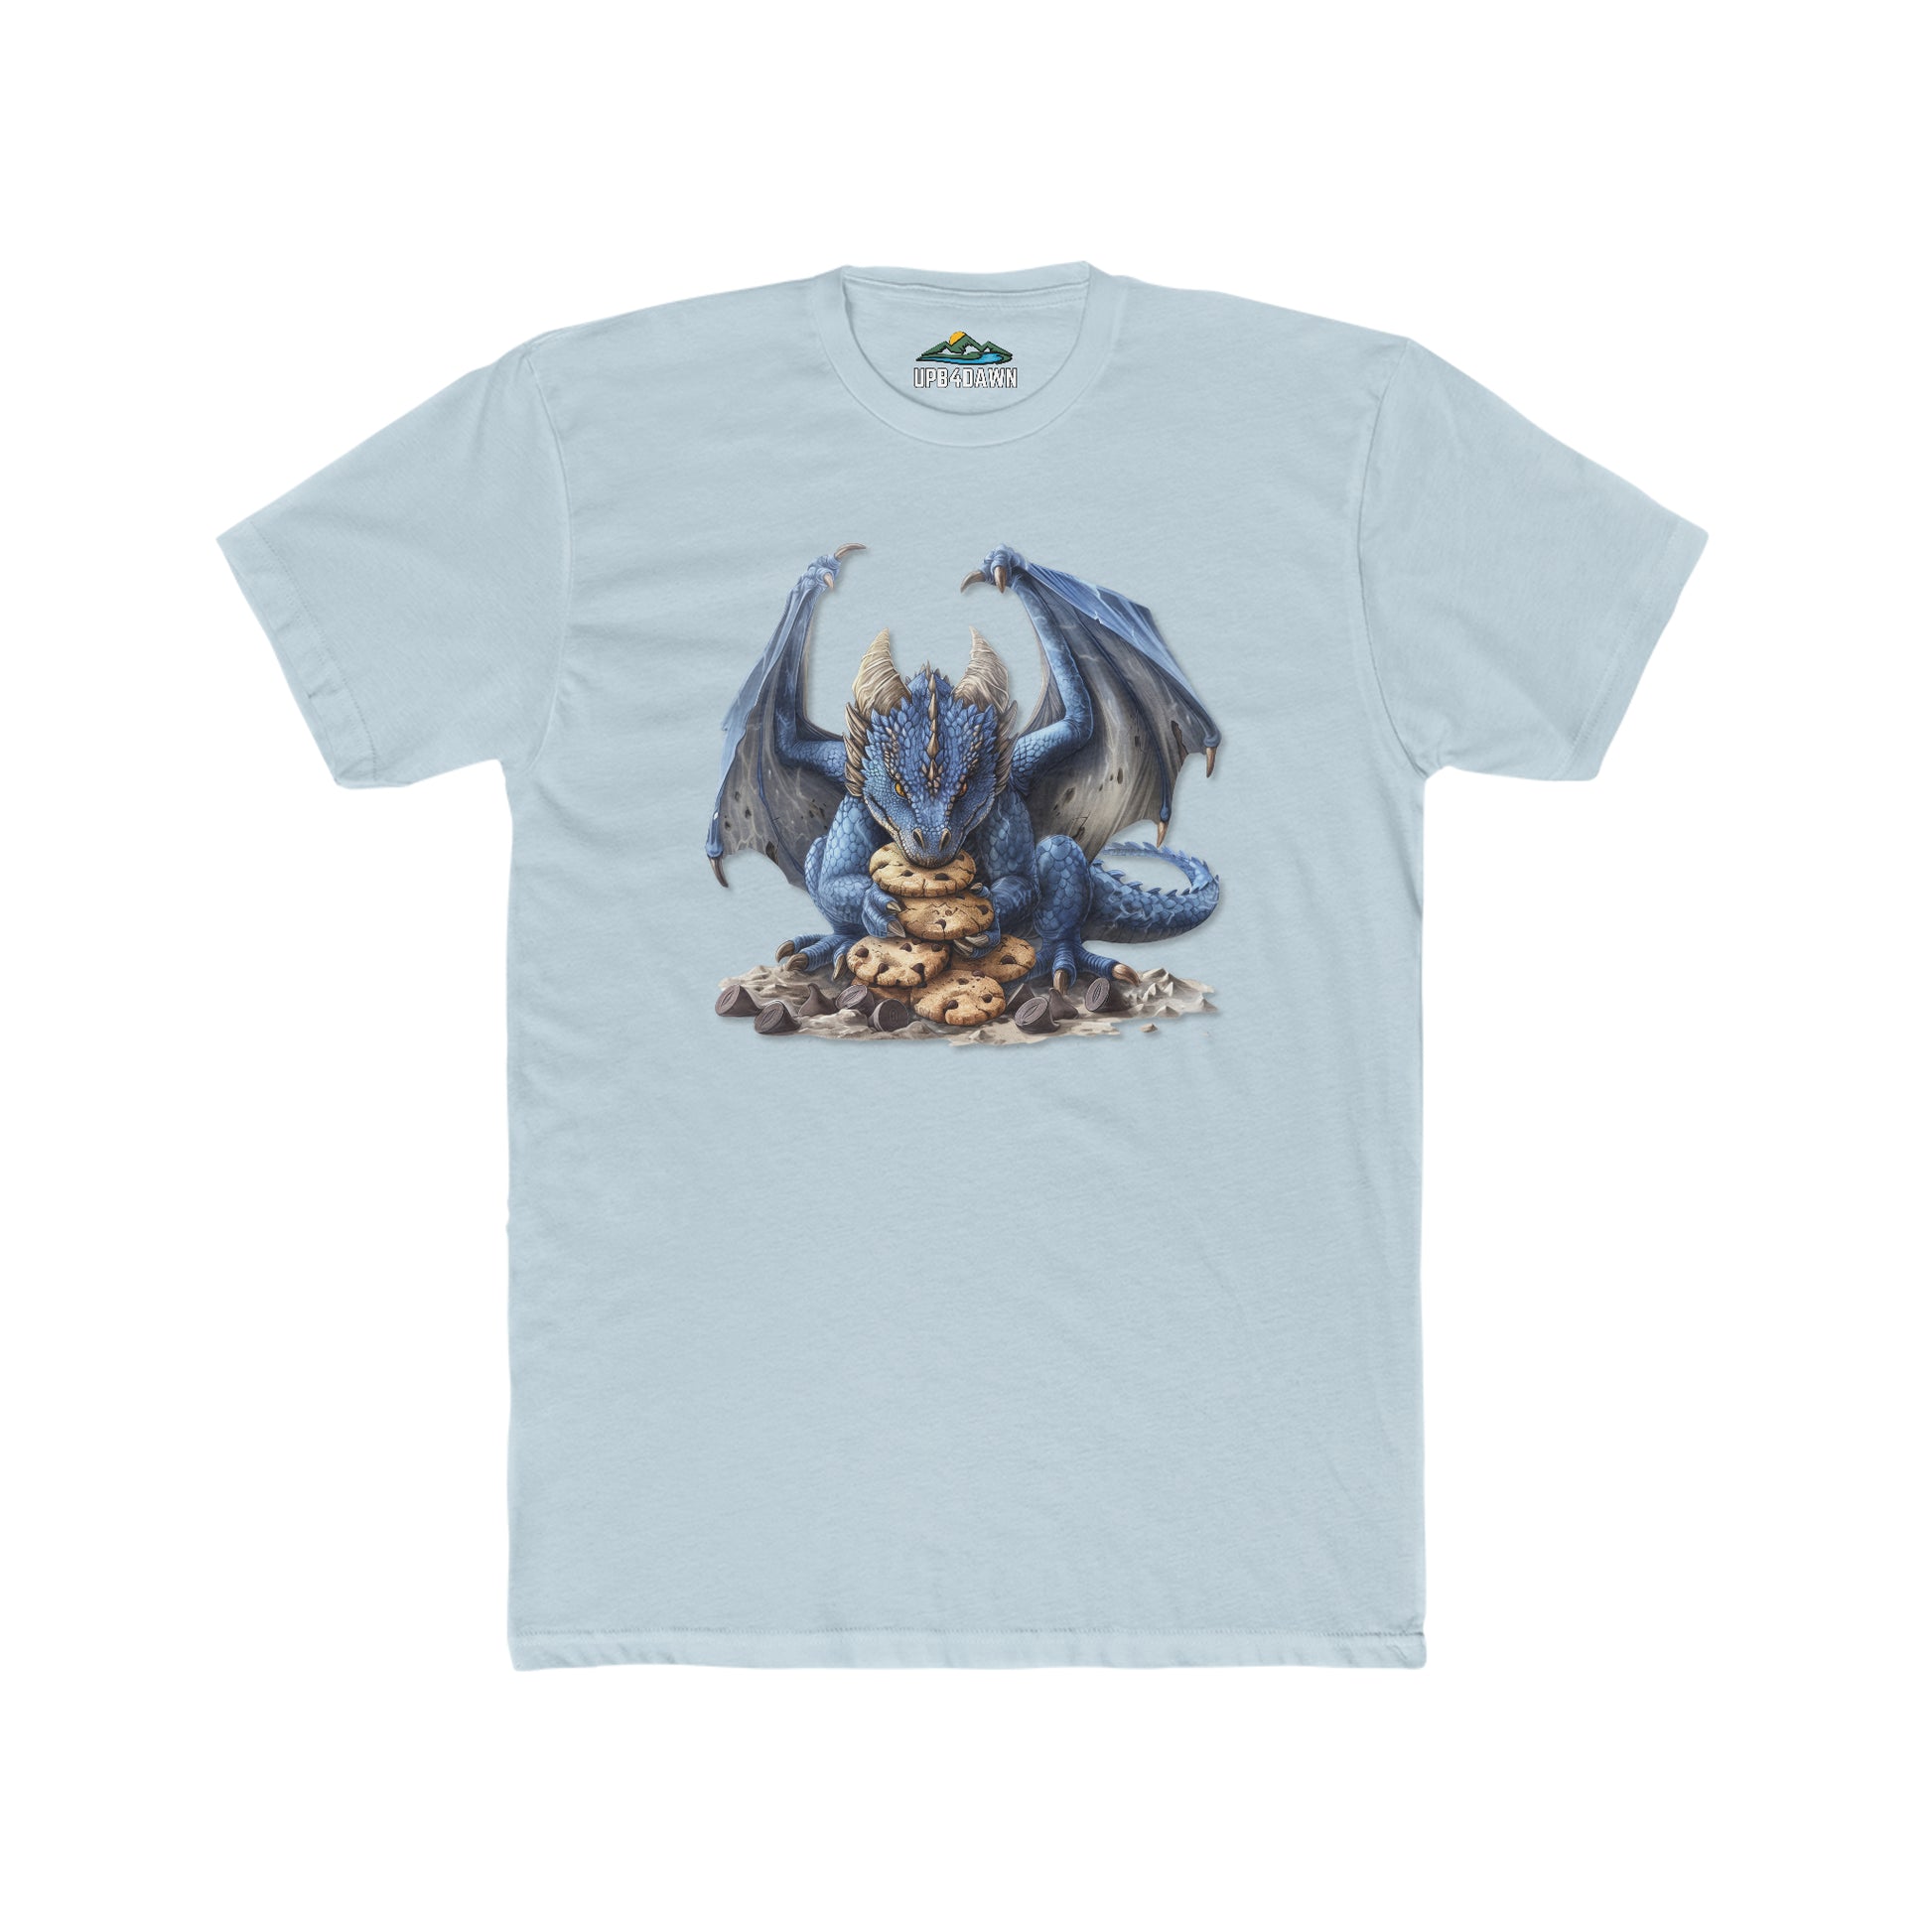 A Custom - Men's Cotton Crew Tee - Blue Dragon 1 with a graphic print of a blue dragon sitting atop a pile of gold and jewels. The shirt has a small green triangular logo at the top.